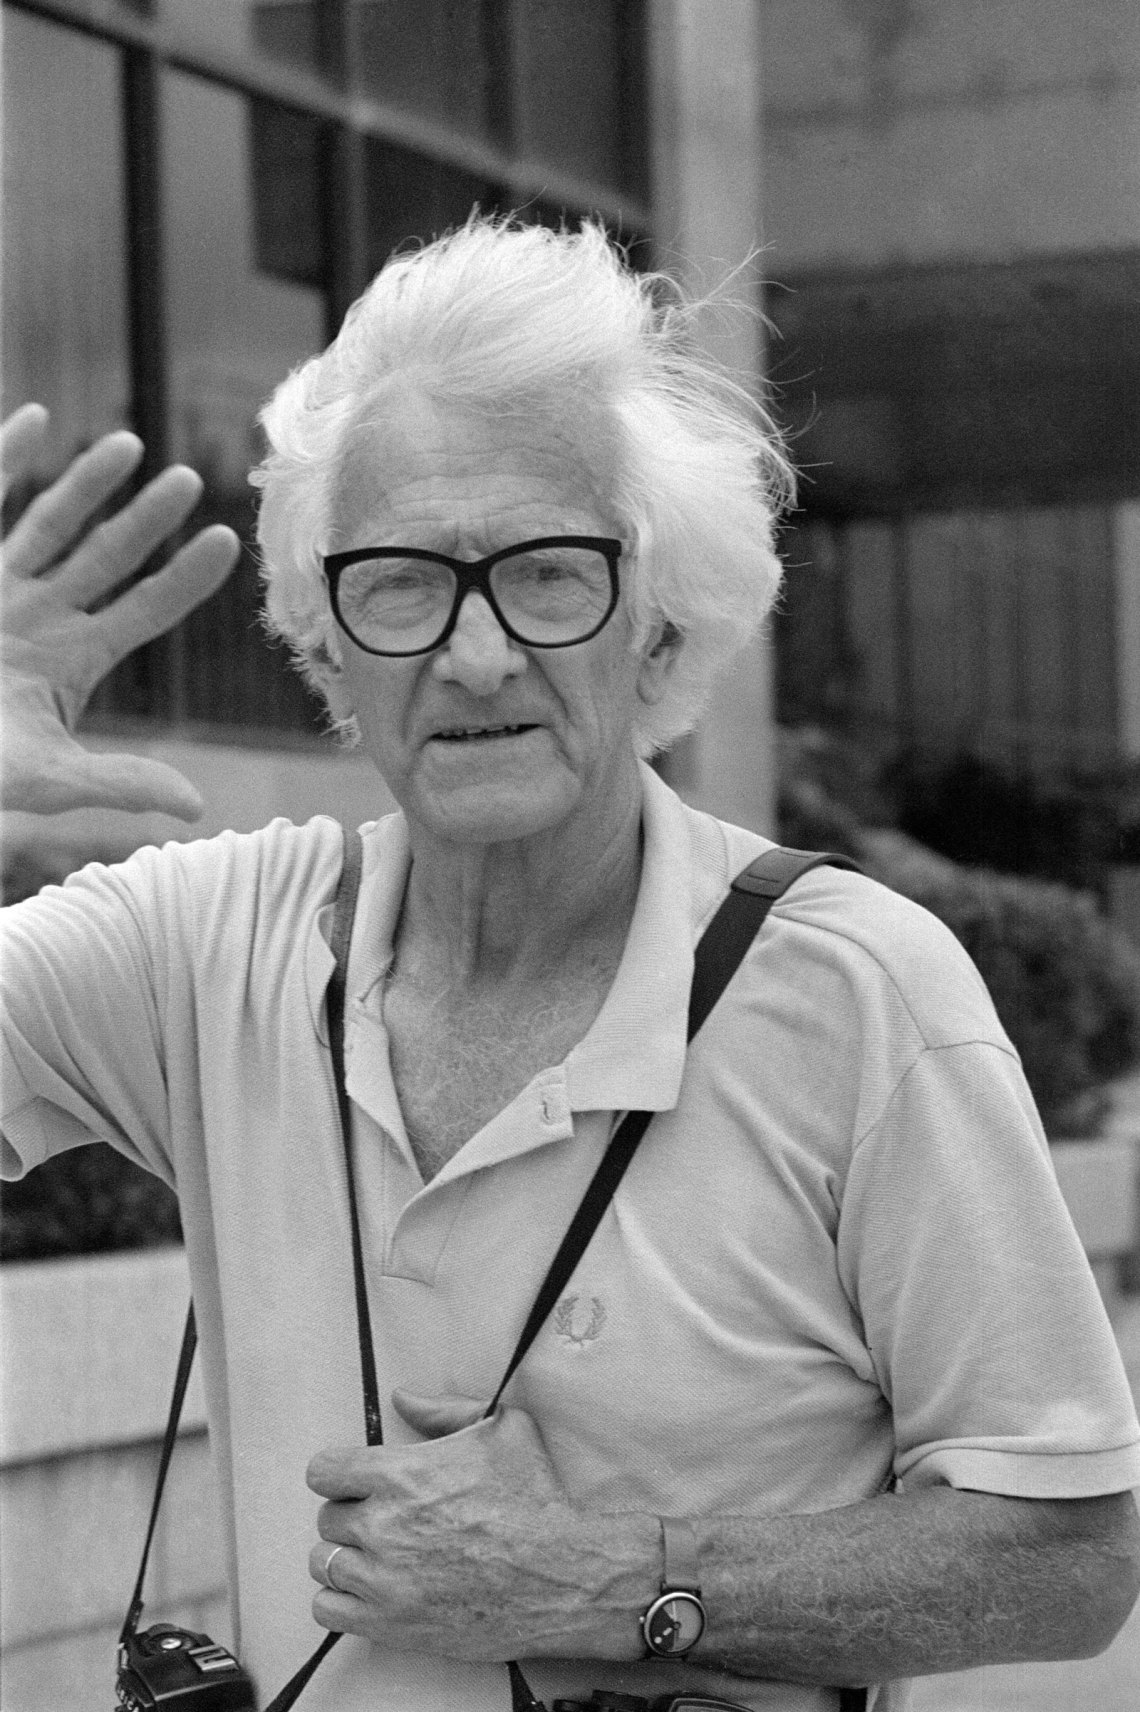 Marc Riboud, with white hair and black-rimmed glasses, waving with one hand up, the other holding the strap of the camera that hangs around his neck